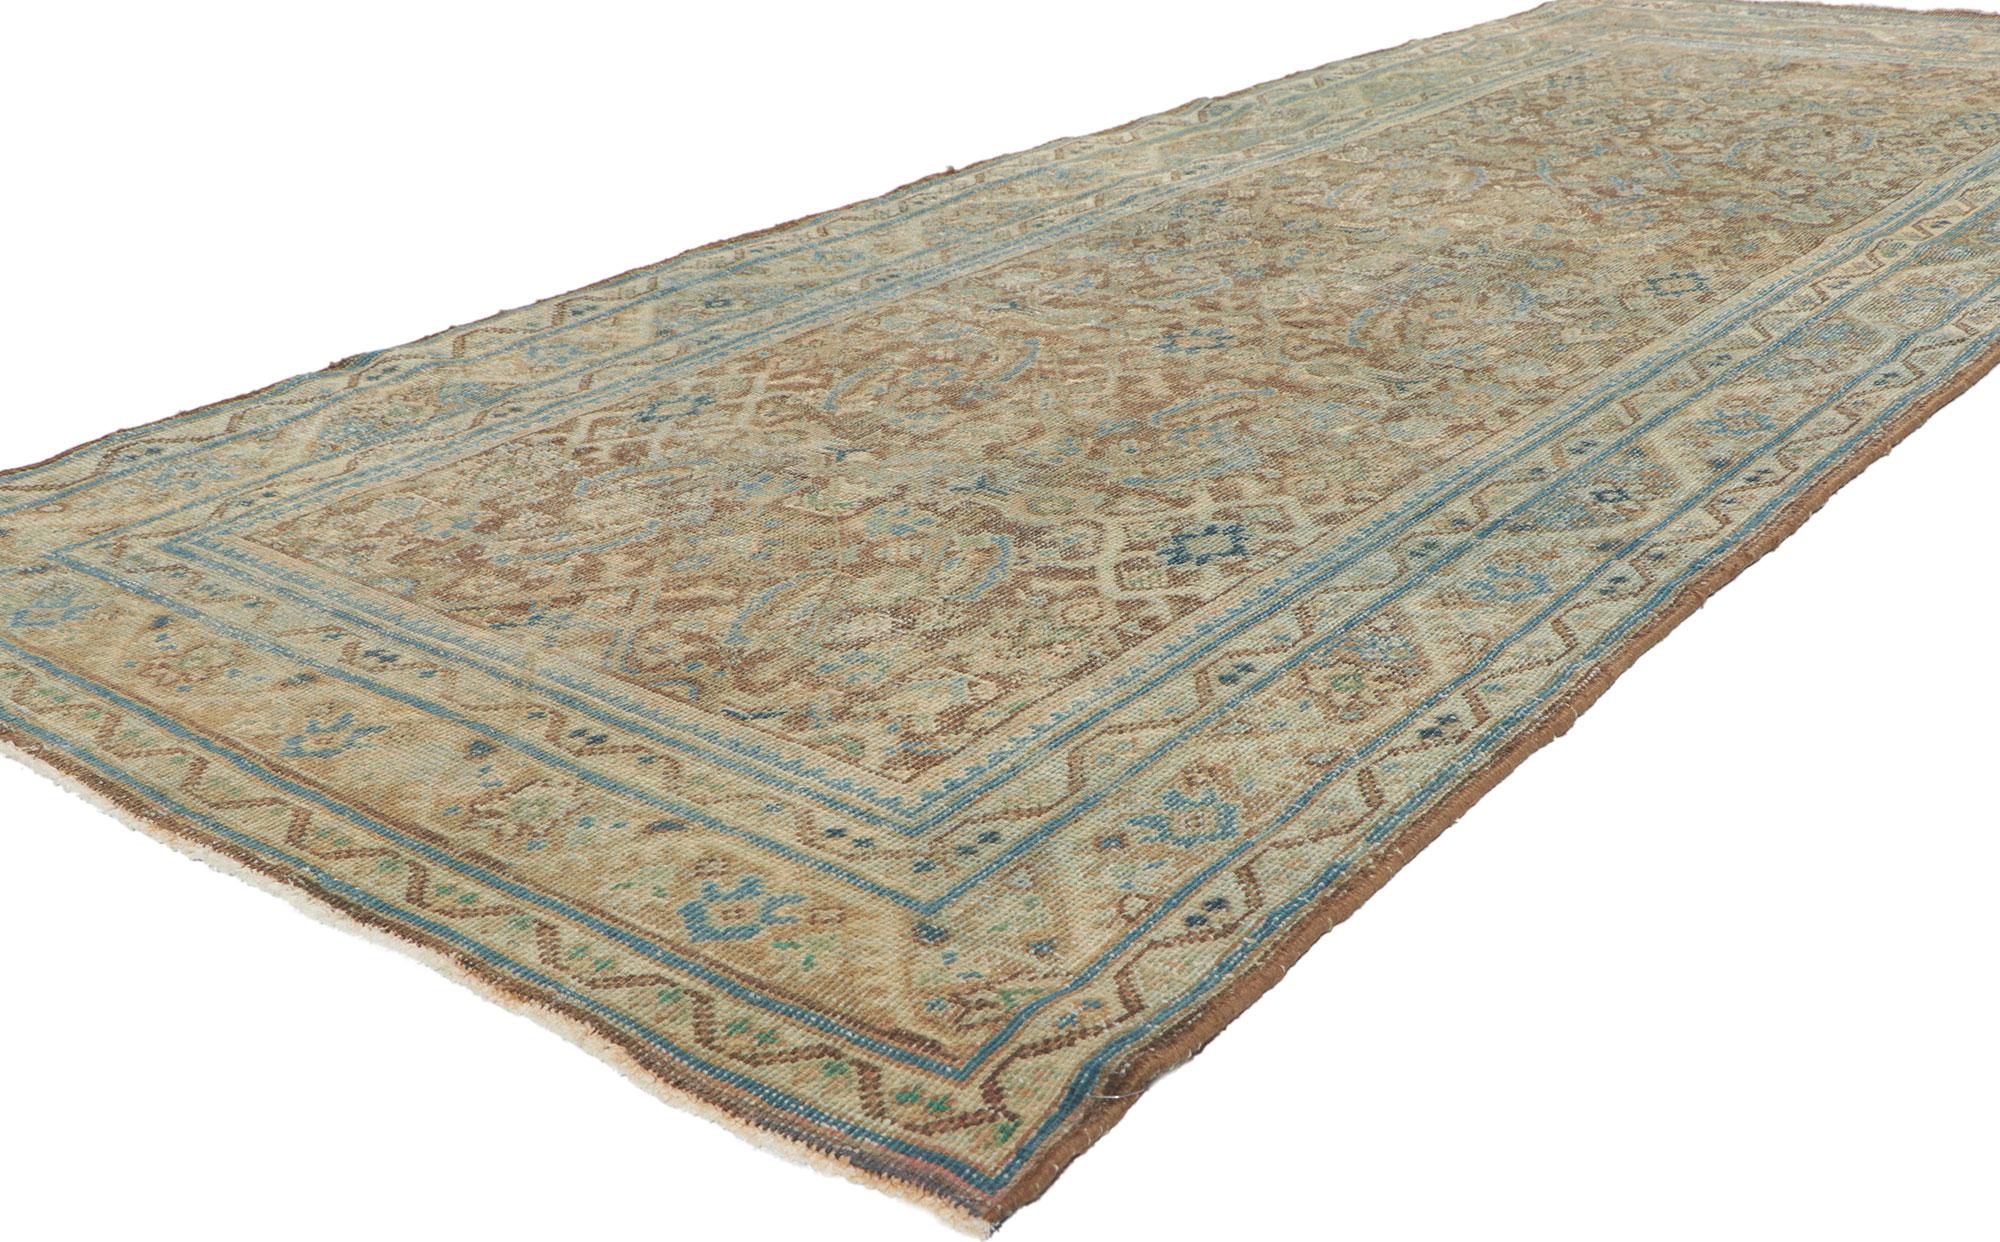 77684 Distressed antique Persian Malayer runner, 04'00 x 09'08. Balancing Traditional Design elements with rustic sensibility, this hand knotted antique Persian Malayer runner is a captivating vision of woven beauty. The eye-catching Herati pattern